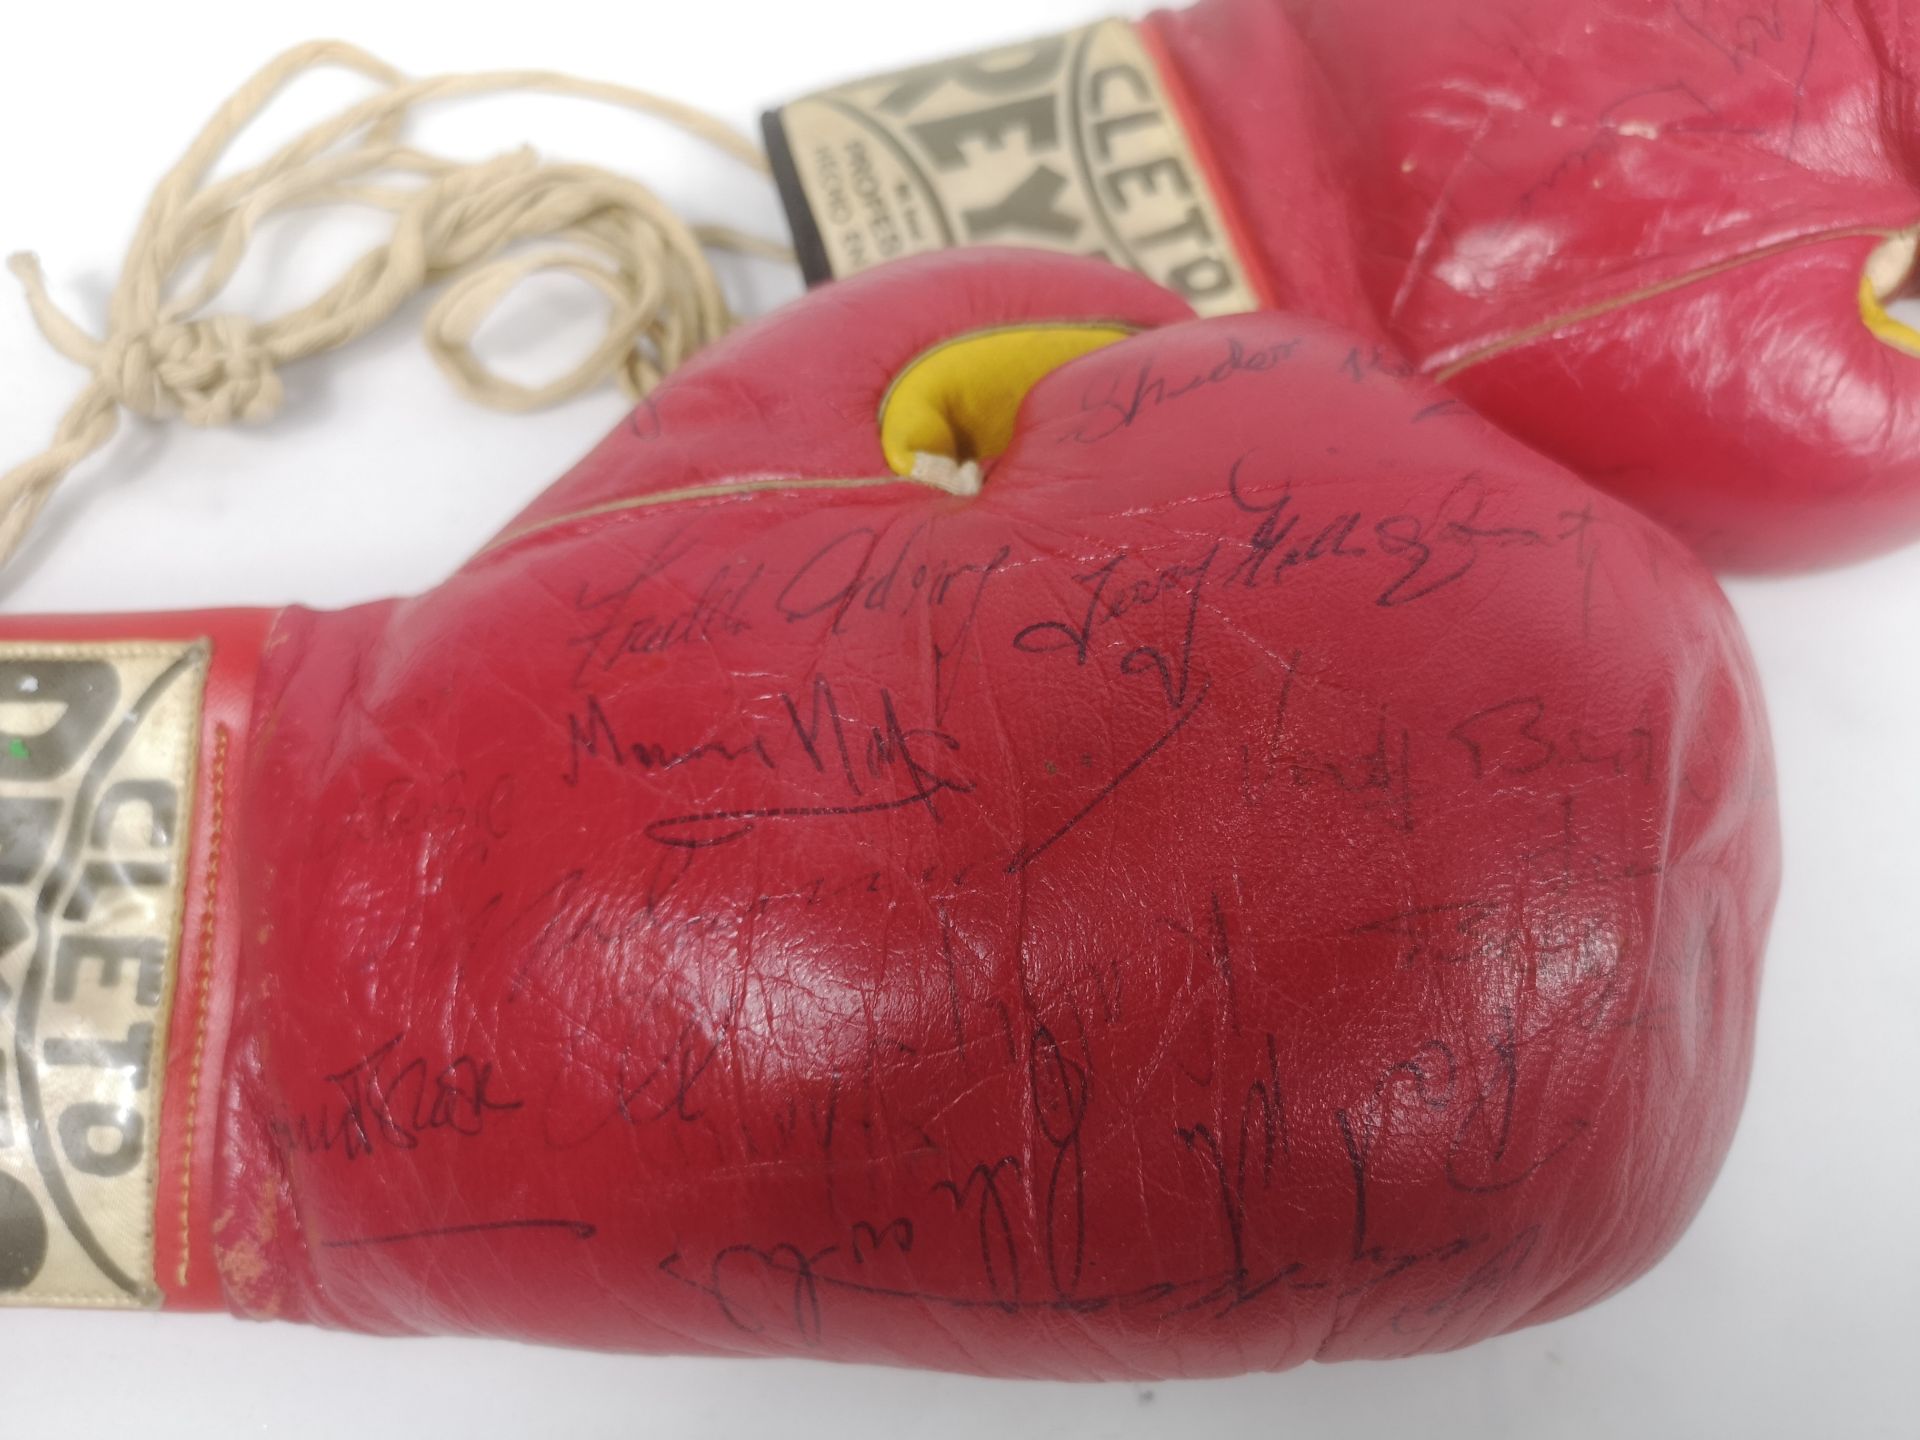 Pair of signed Cleto Reyes boxing gloves with approximately 17 signatures. - Image 6 of 9